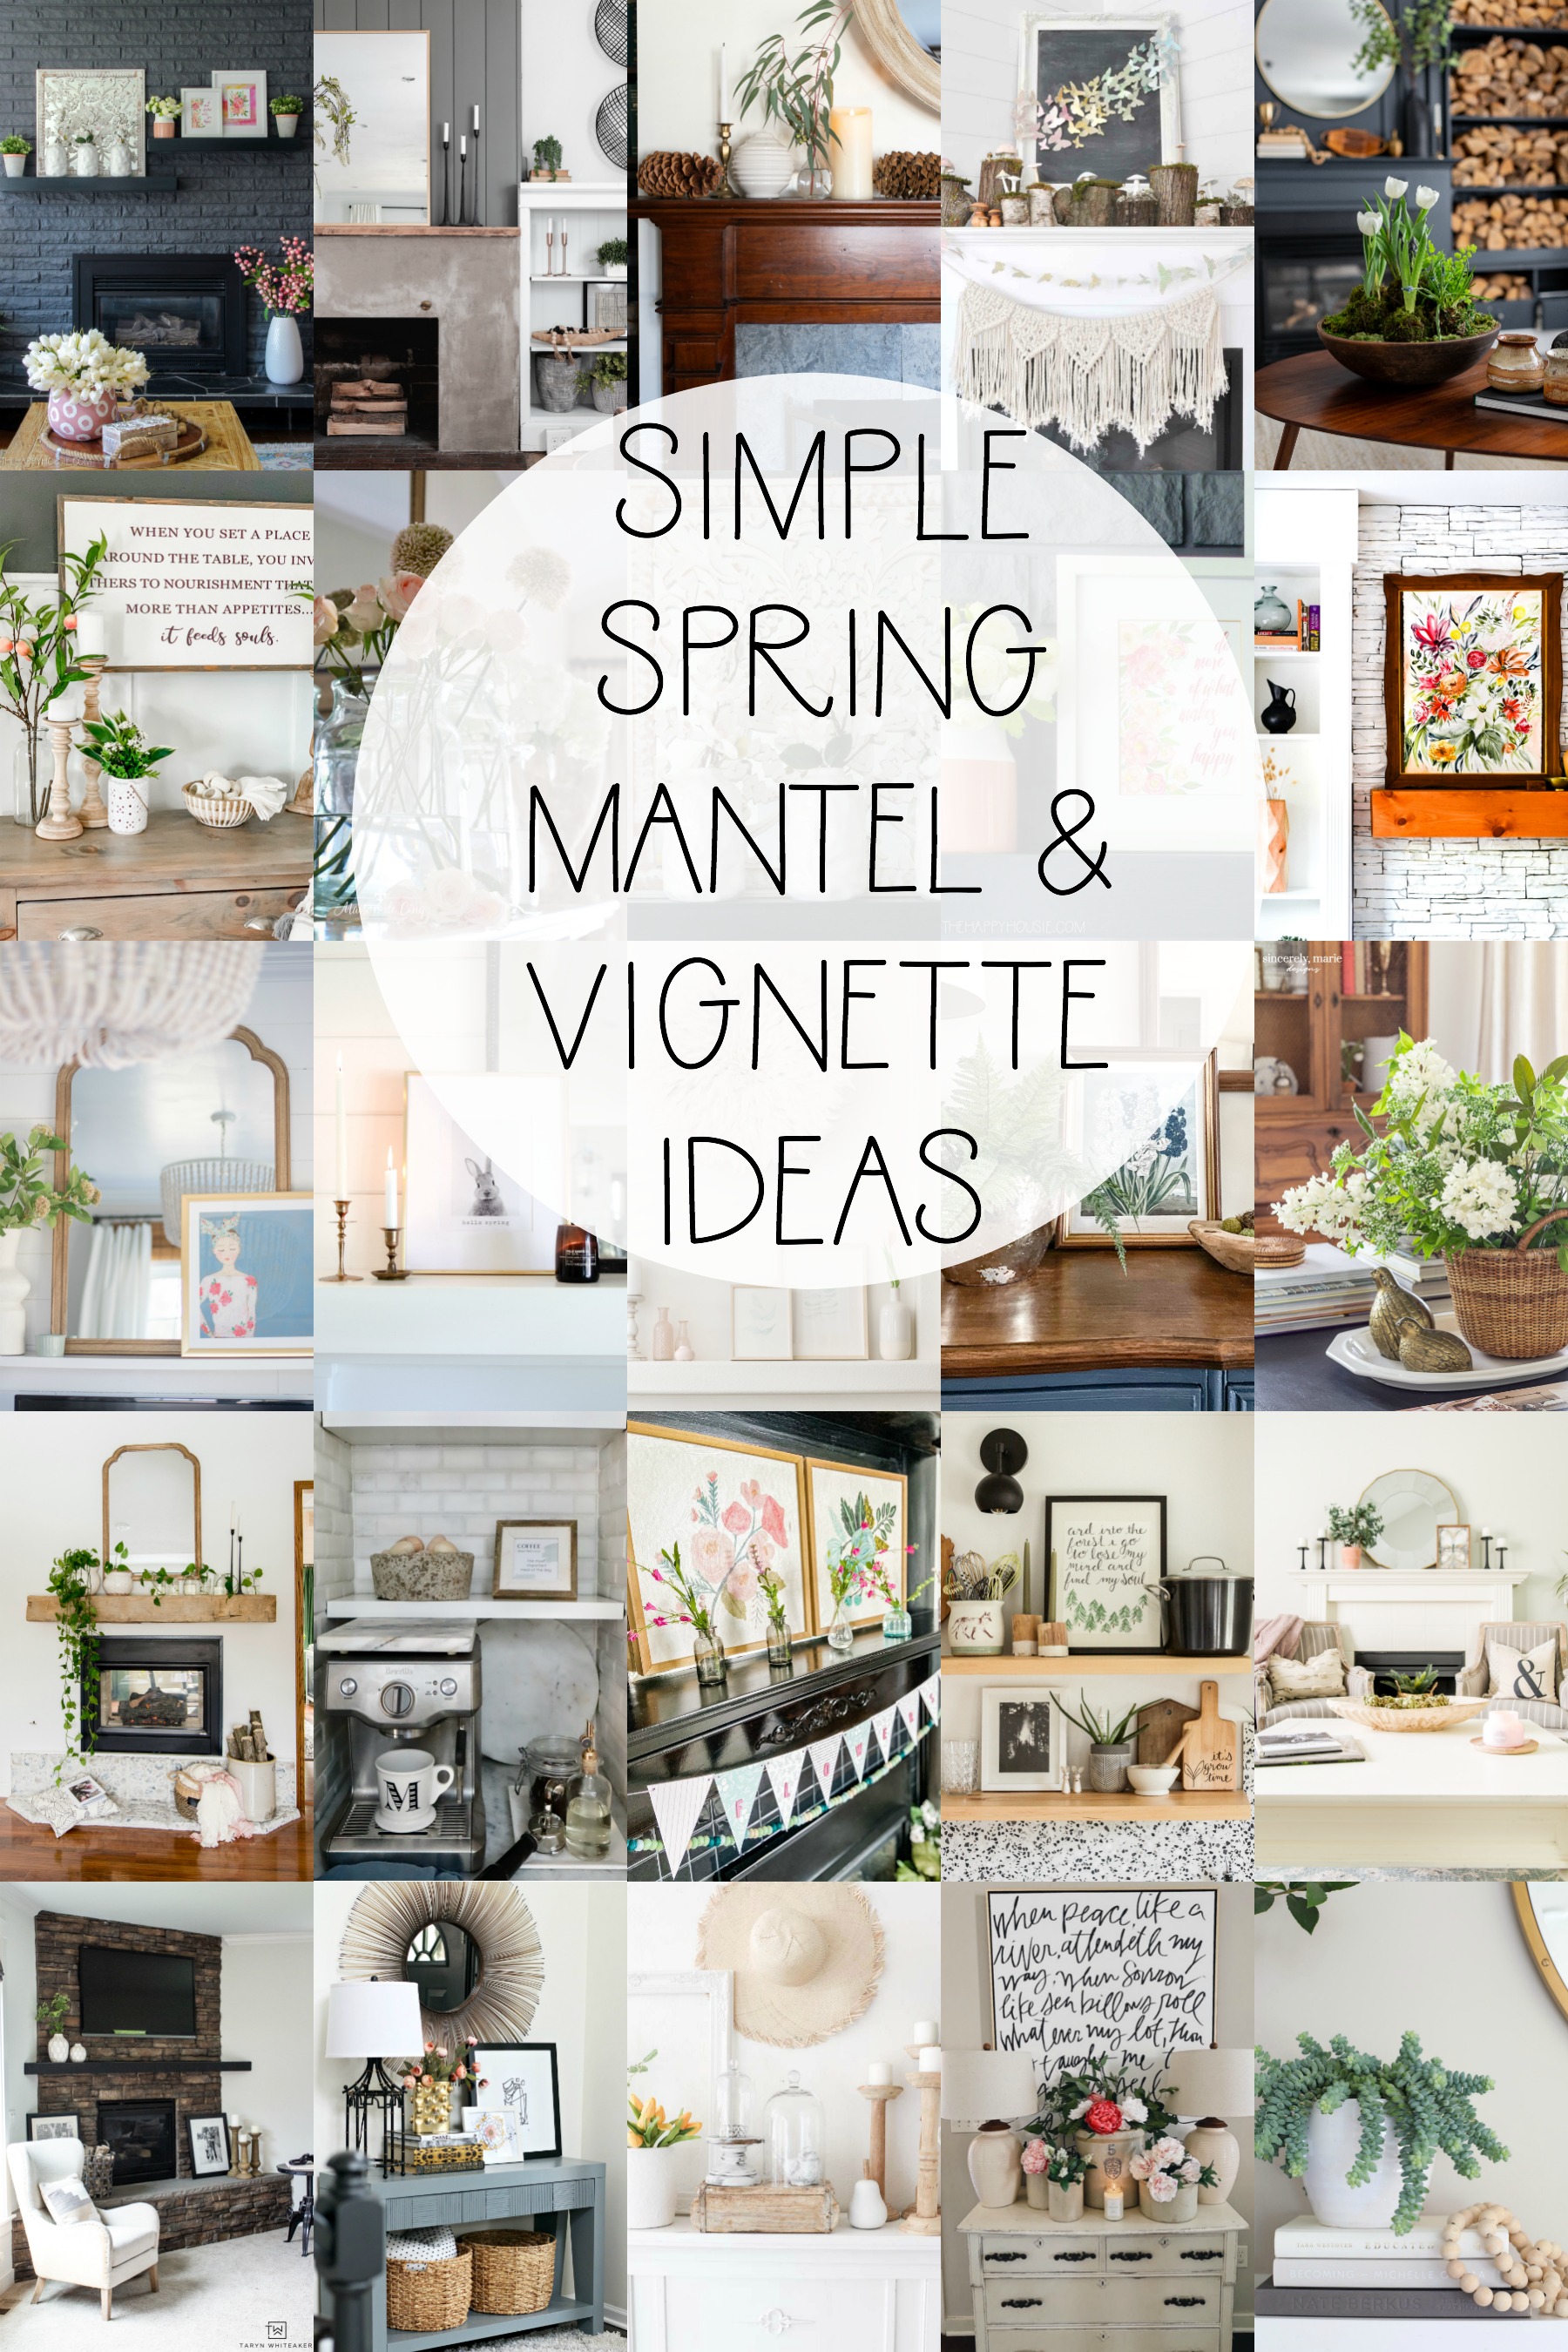 Simple Spring Mantel and Vignette Ideas.